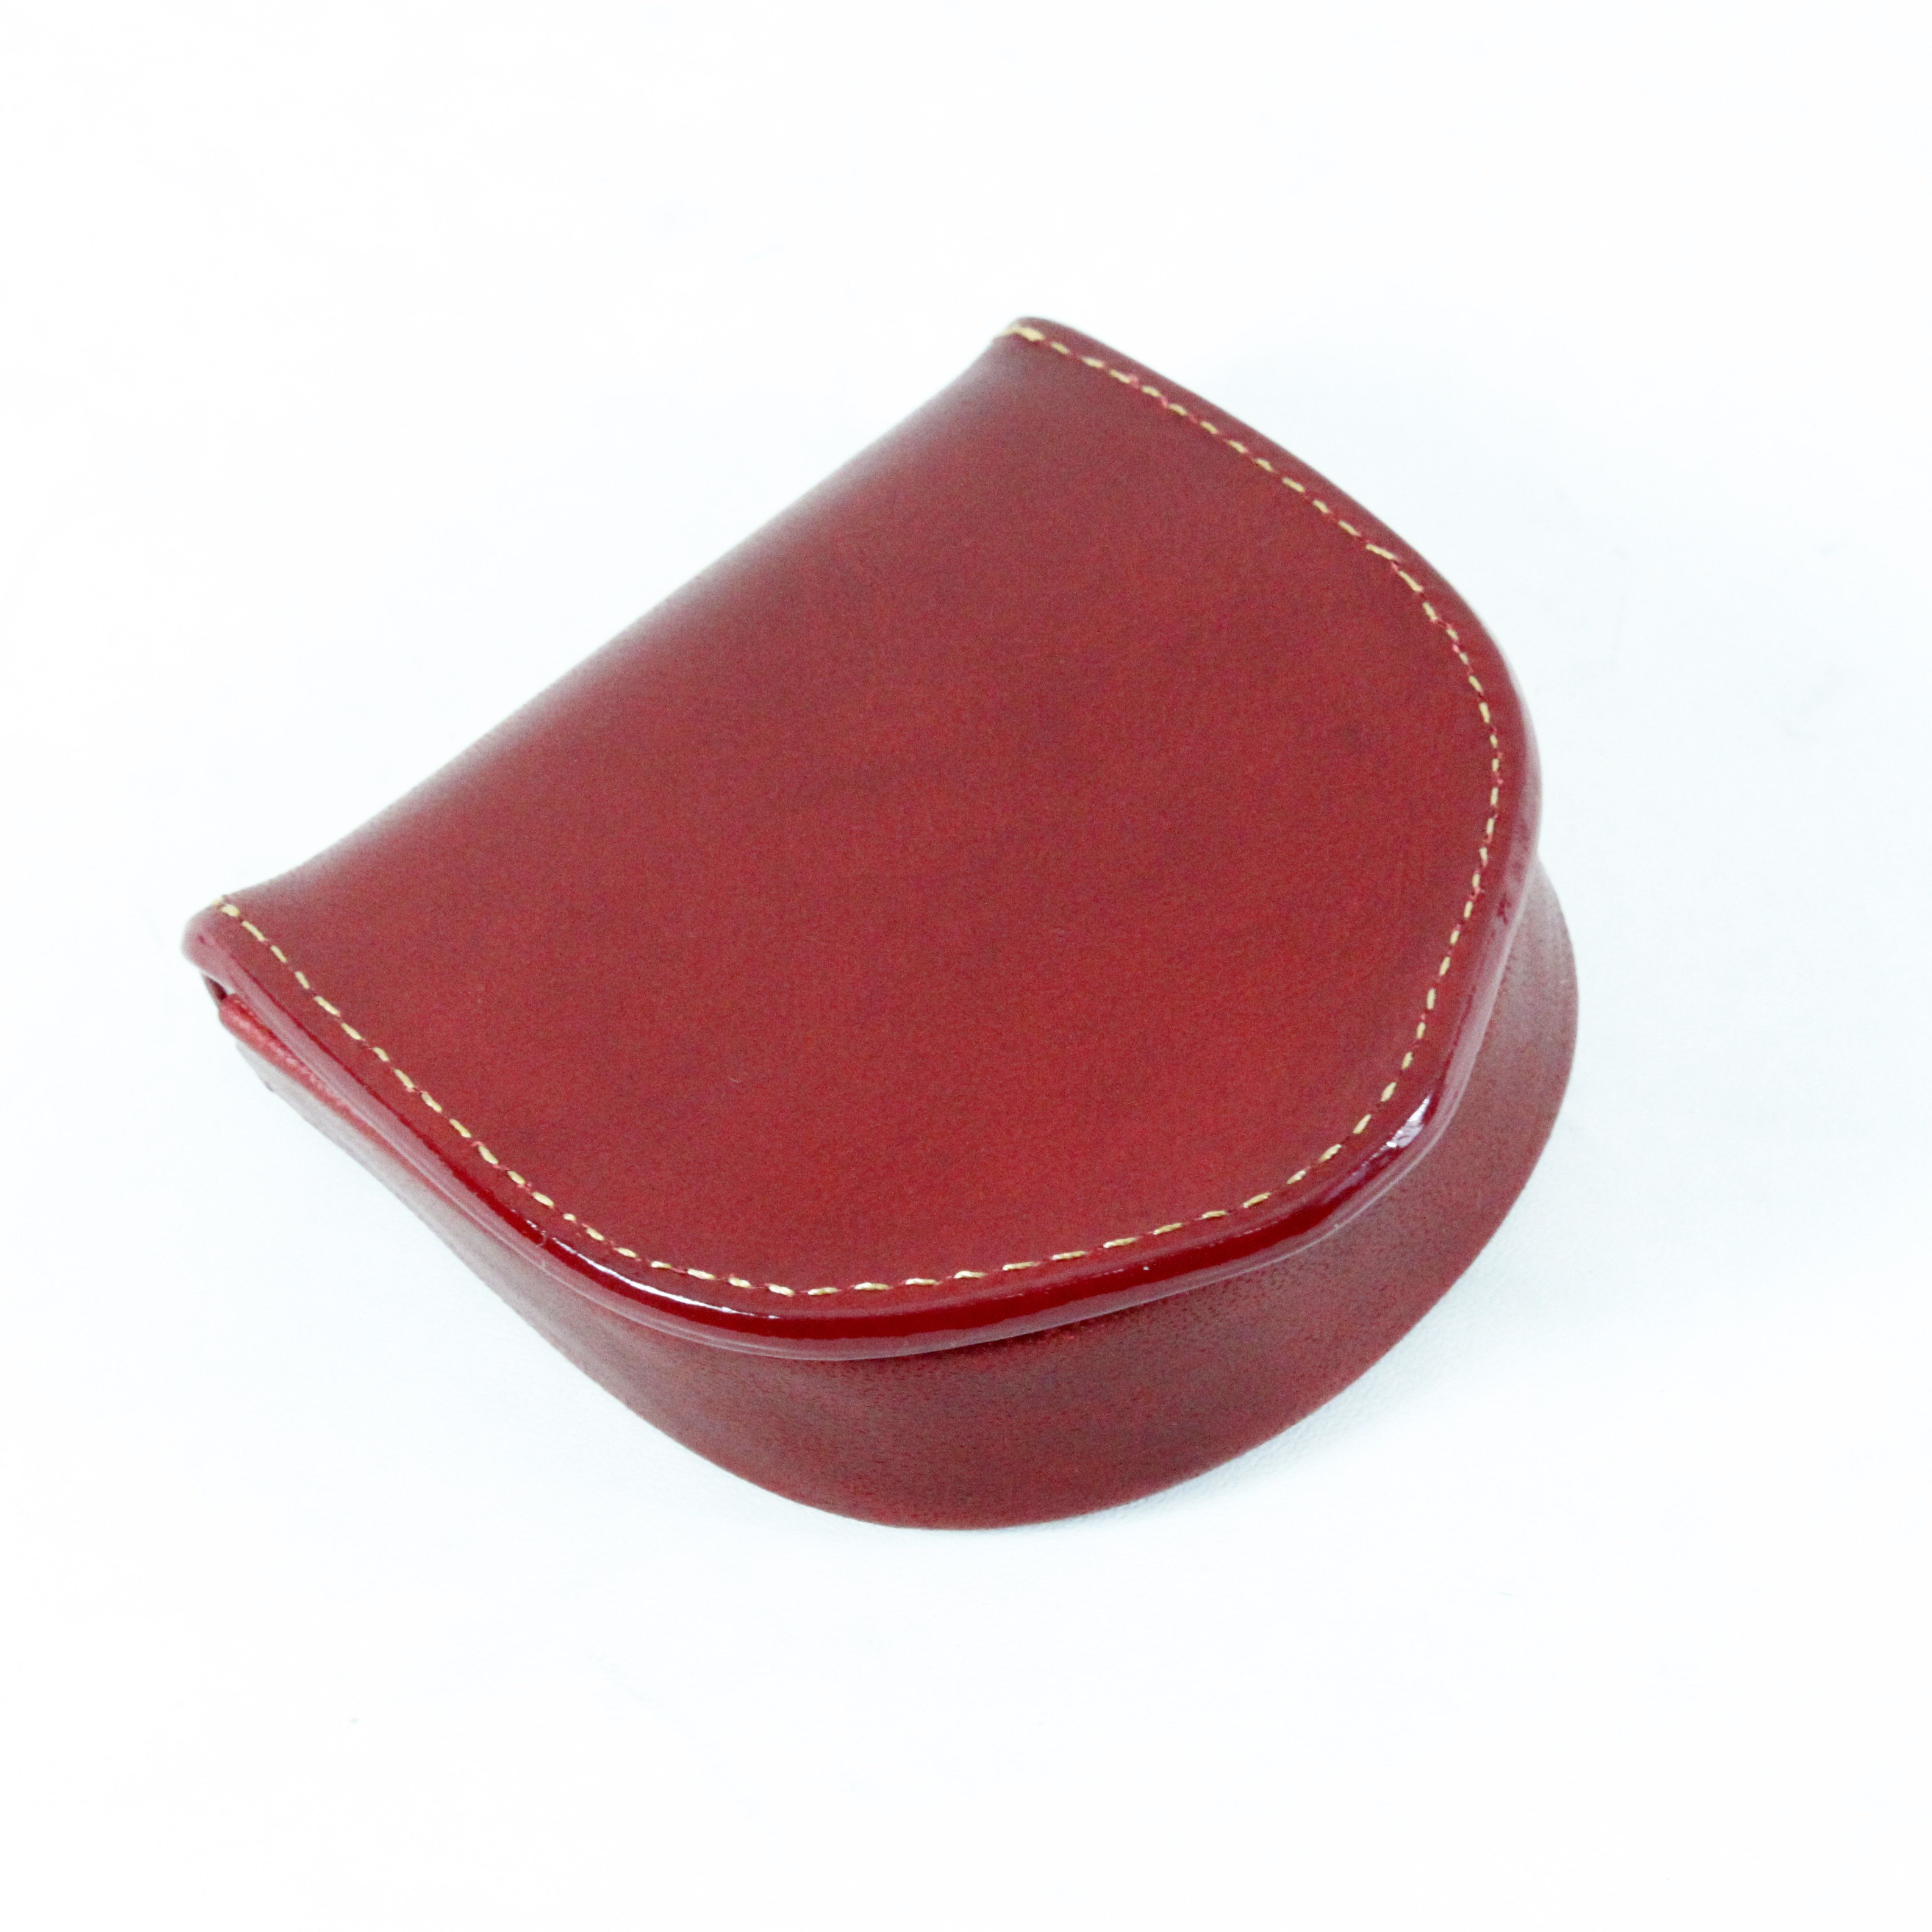 Genuine Leather Women Small Coin Hand Purse for Regular Use, (Size, L- 5.50  x H- 3.50